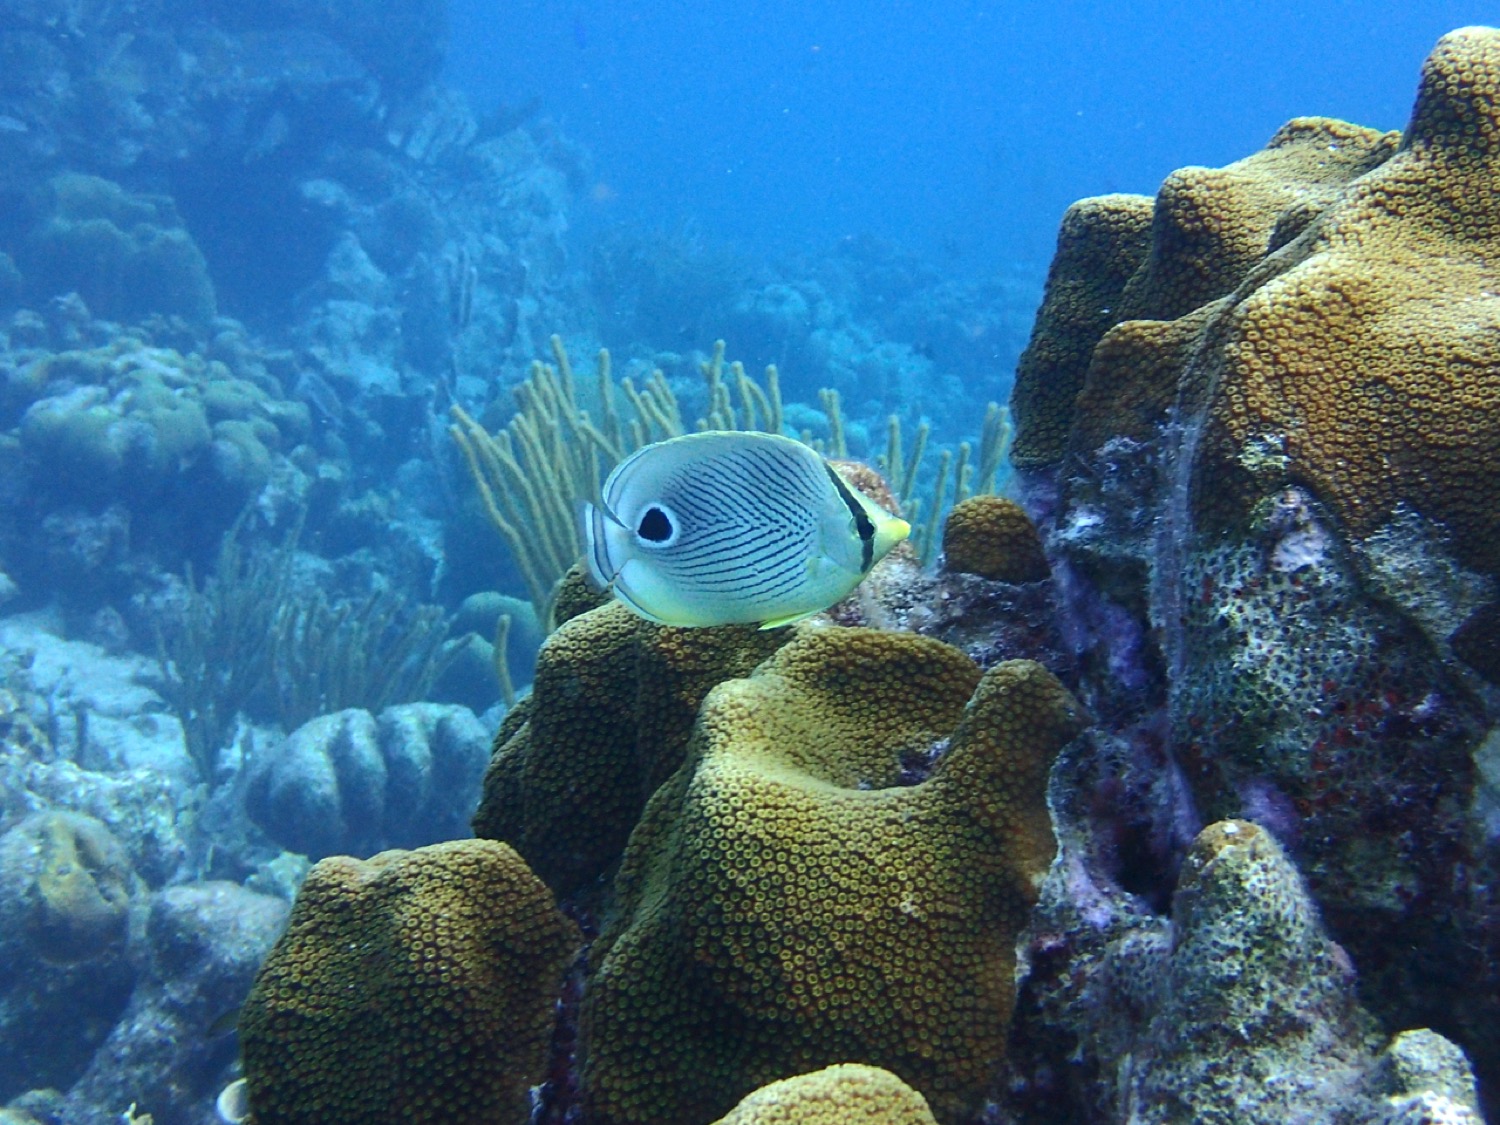 a circular shaped small fish swimming in a reef. it is mostly white but has a dark spot near its tail